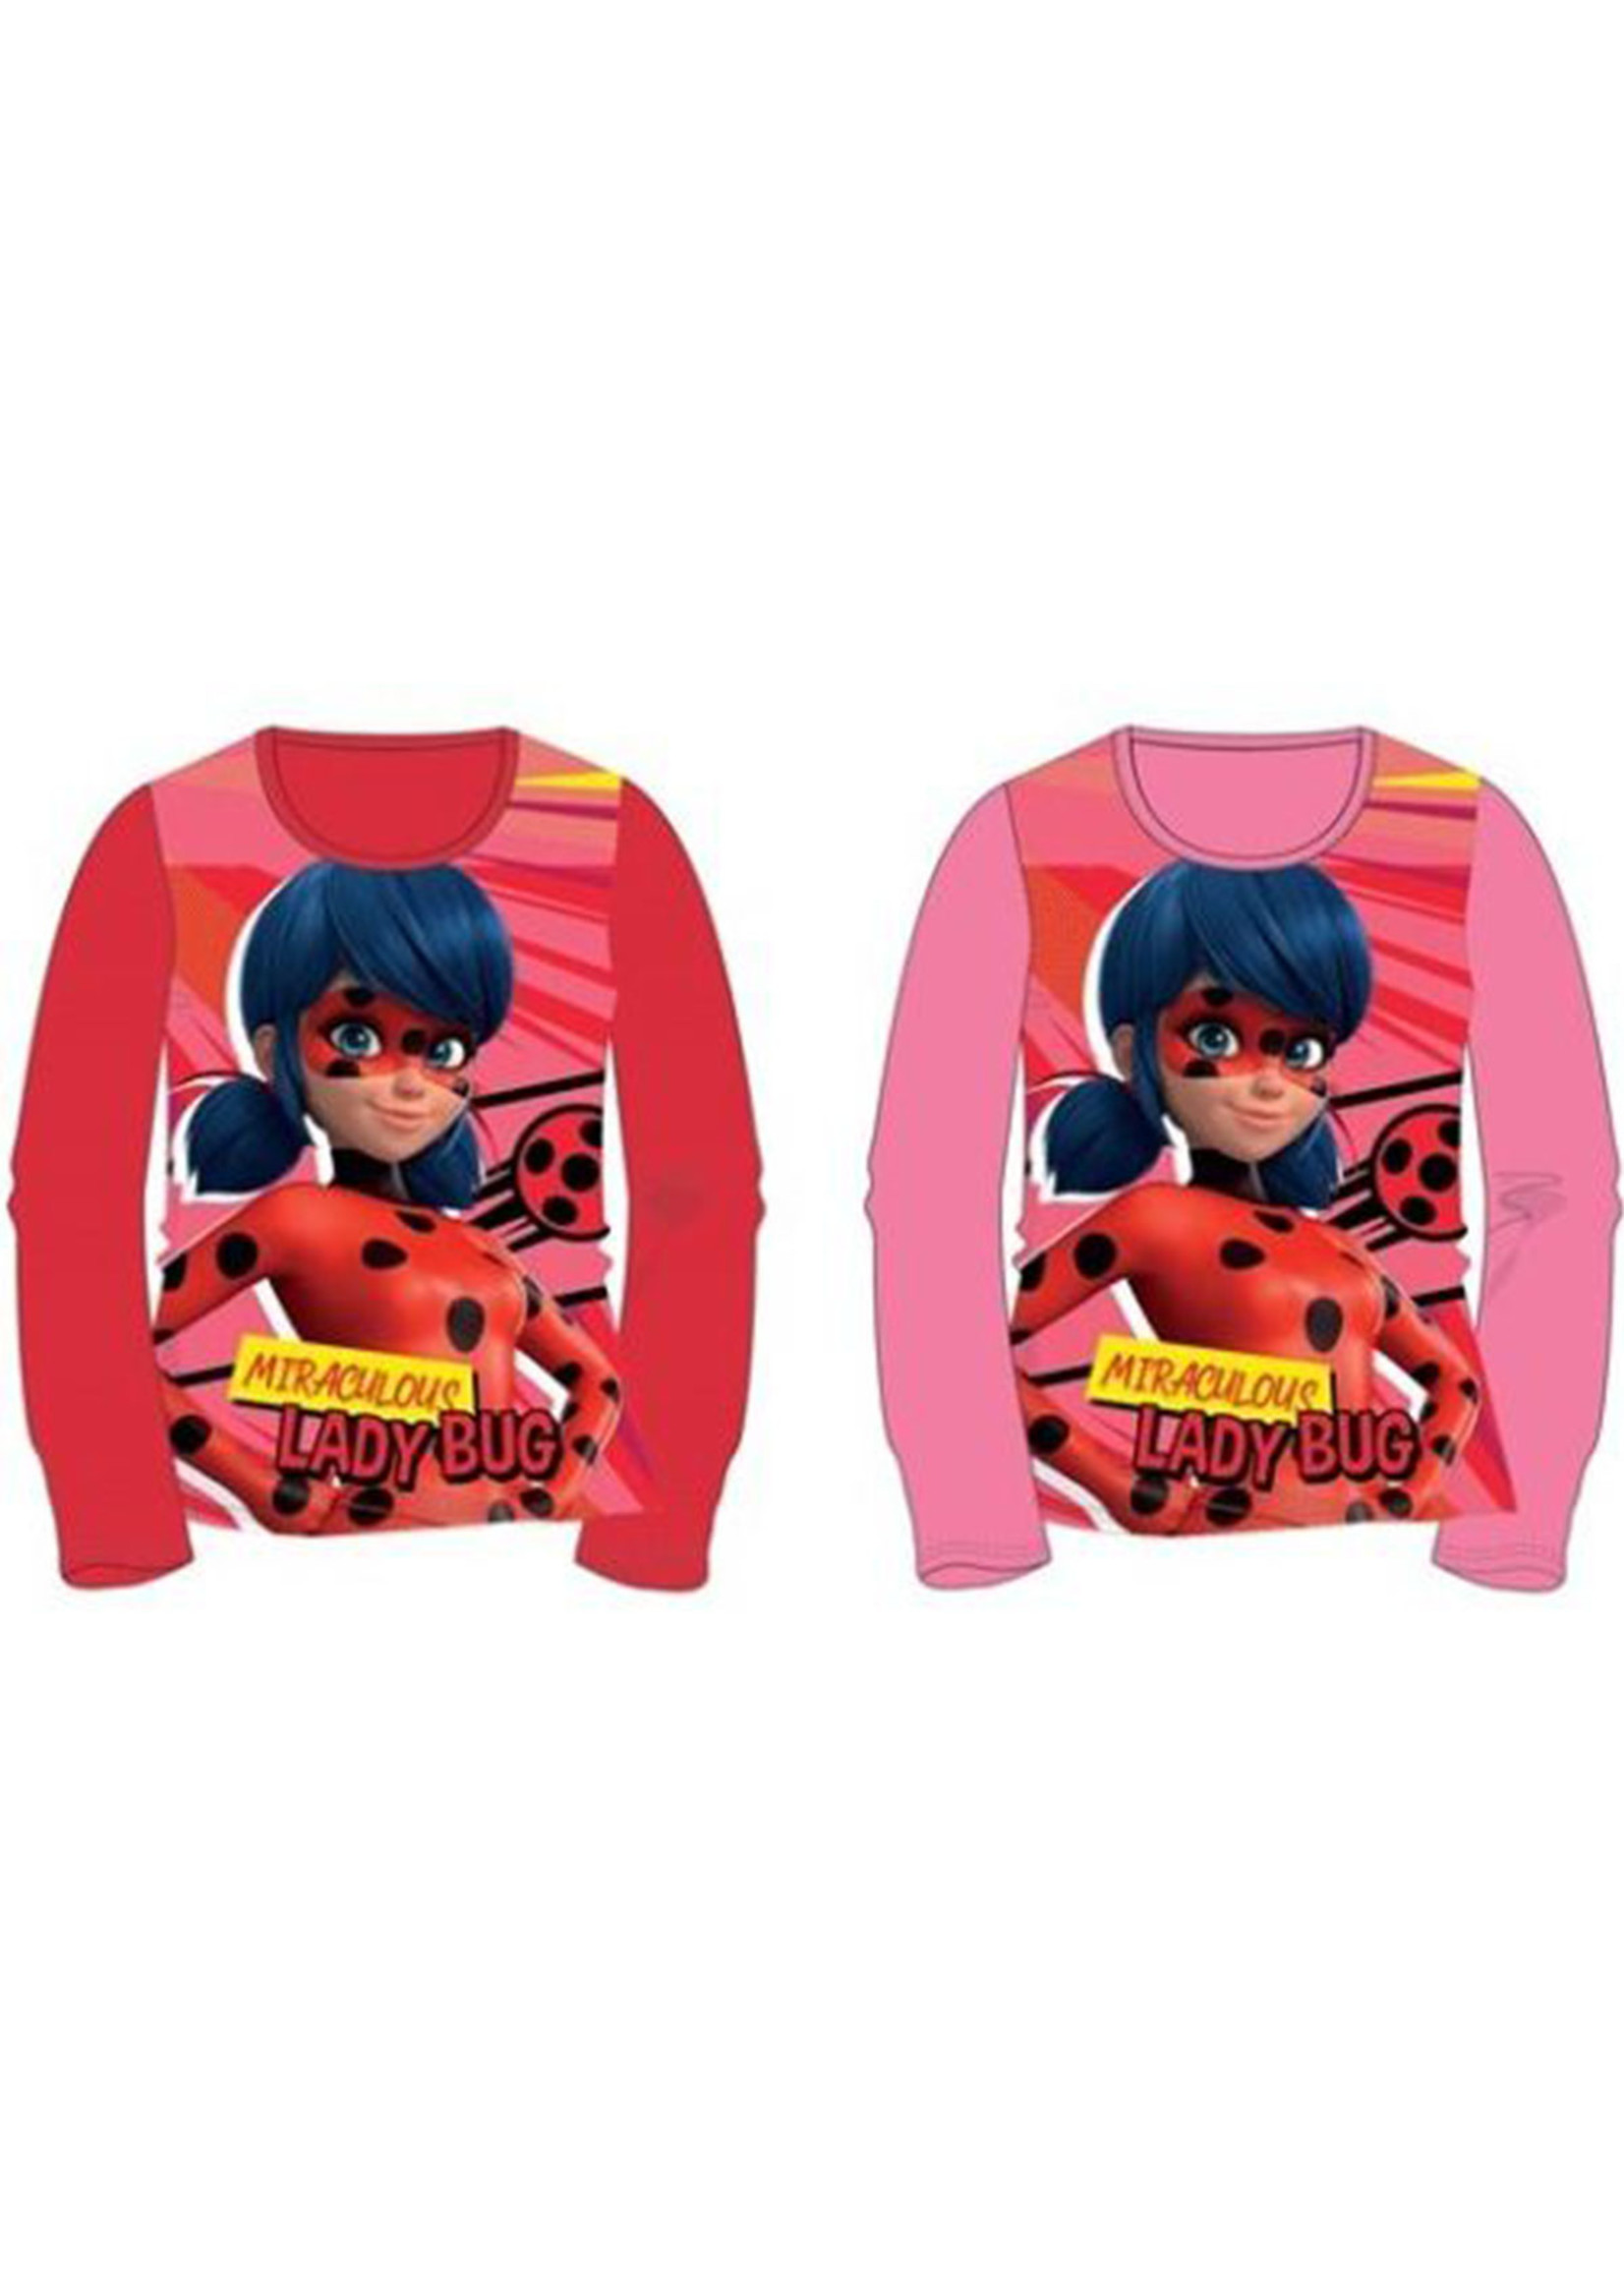 Miraculous Ladybug long sleeve from Miraculous pink